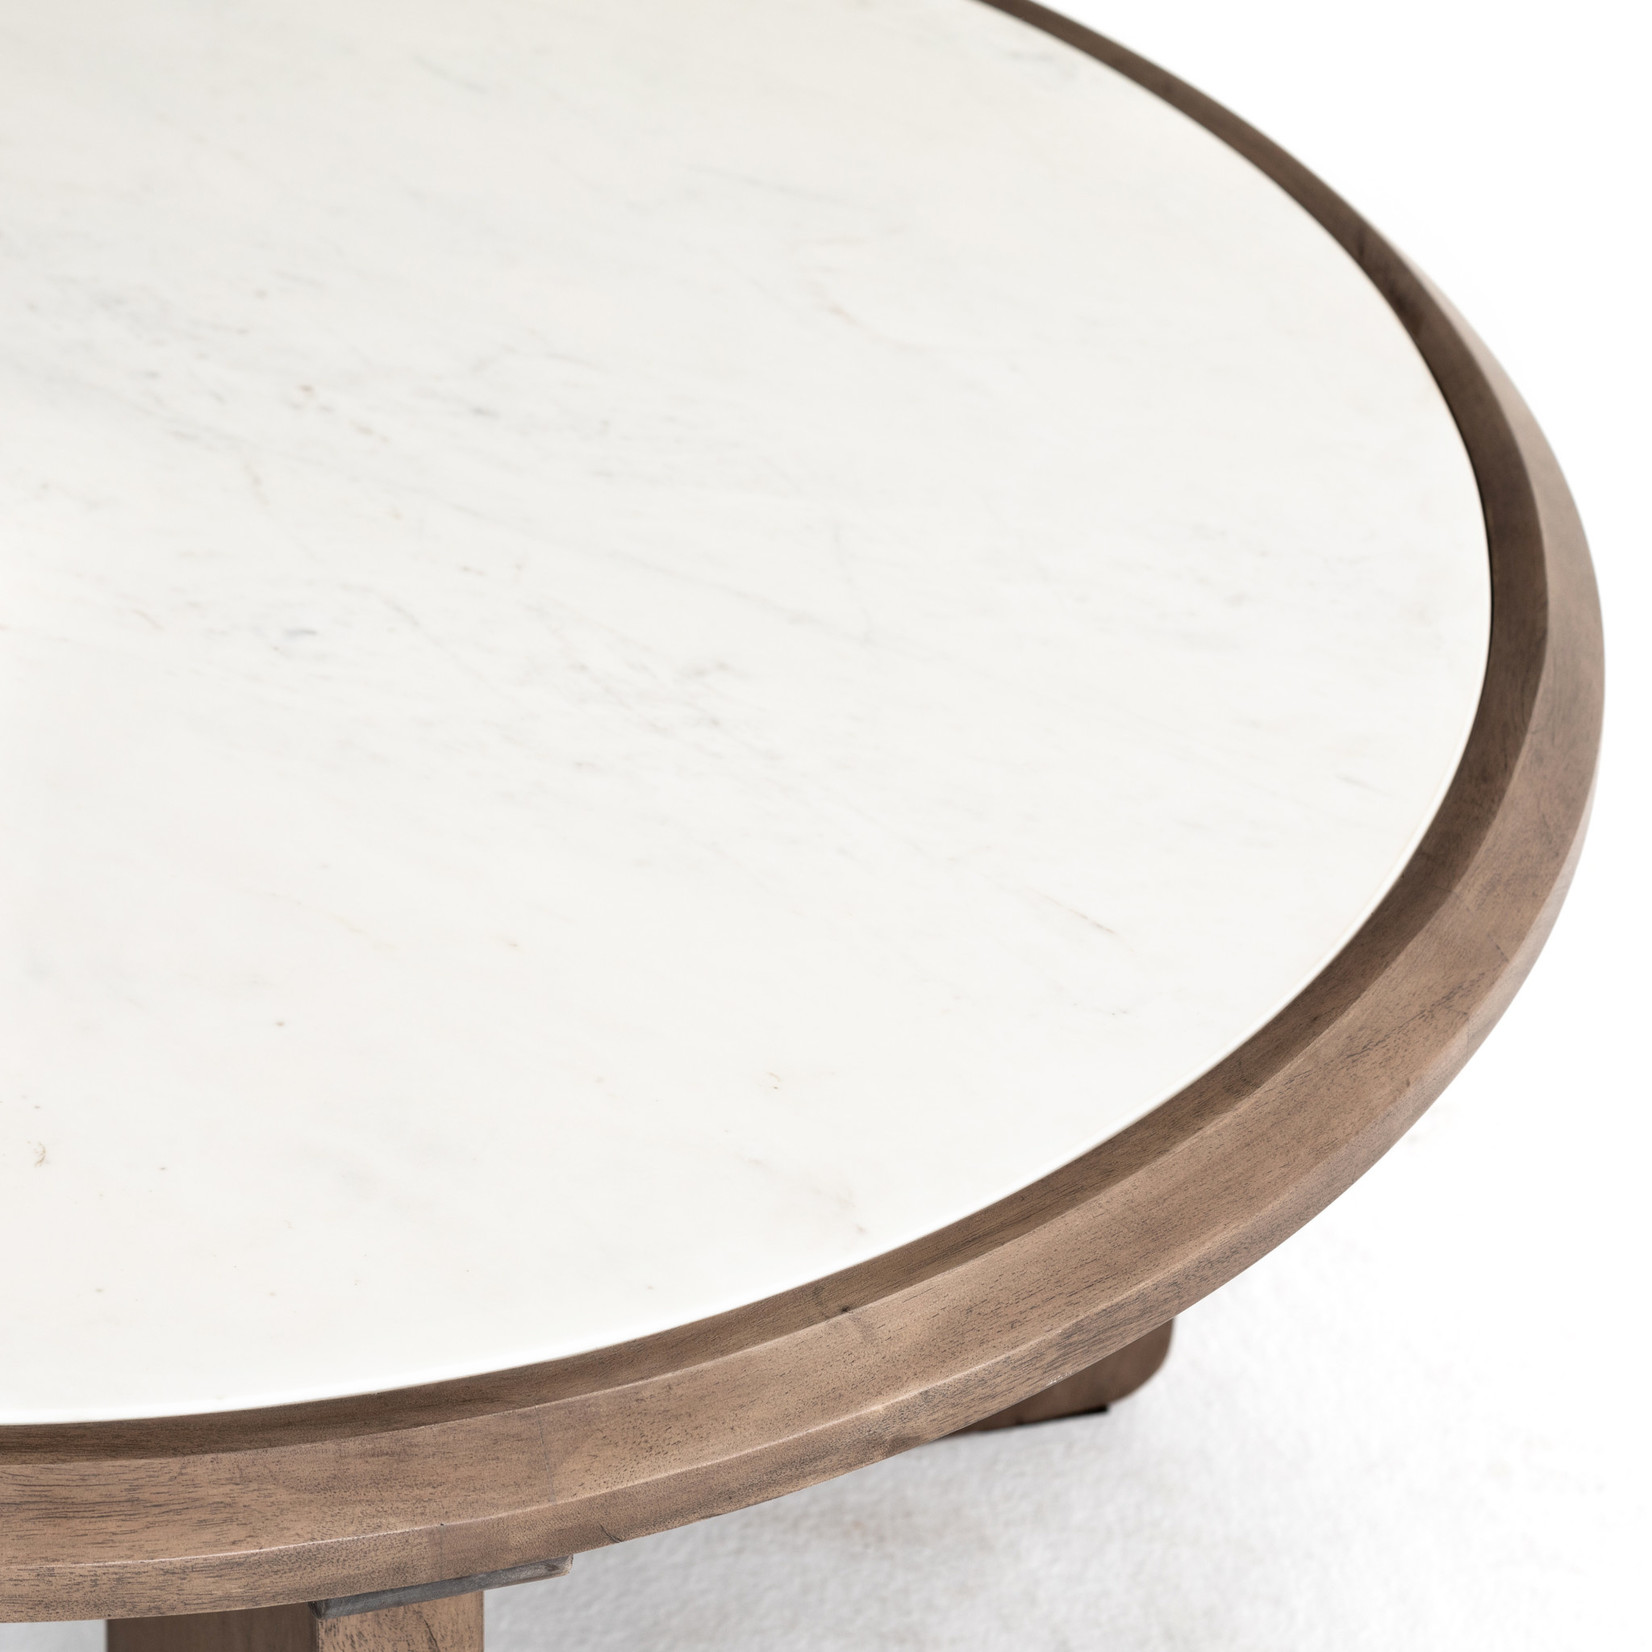 Four Hands Britton Round Coffee Table